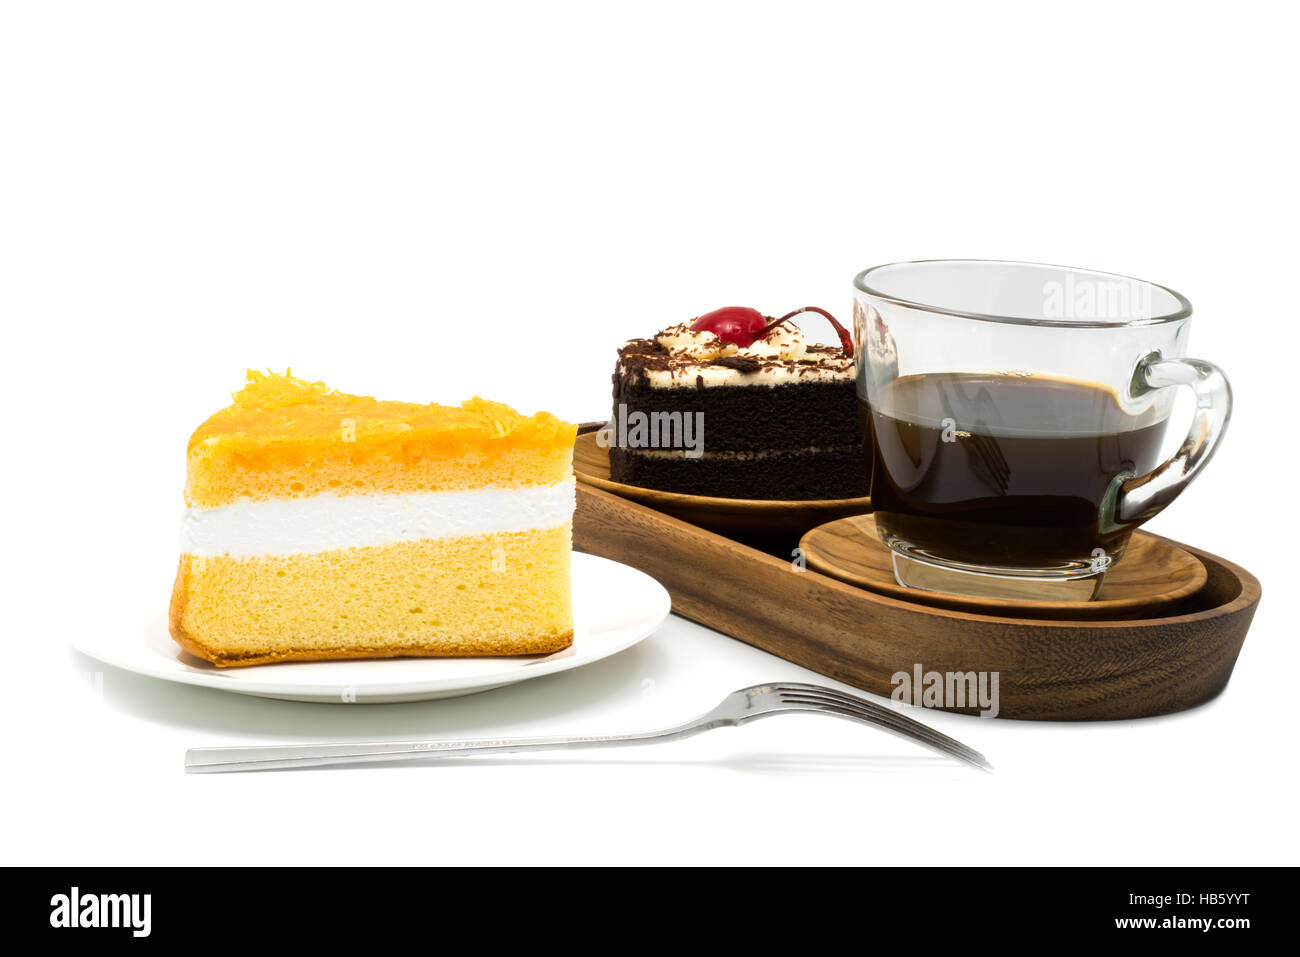 Chiffon cake in a white plate and a cup of coffee with chocolate cake in a wooden tray on white background Stock Photo